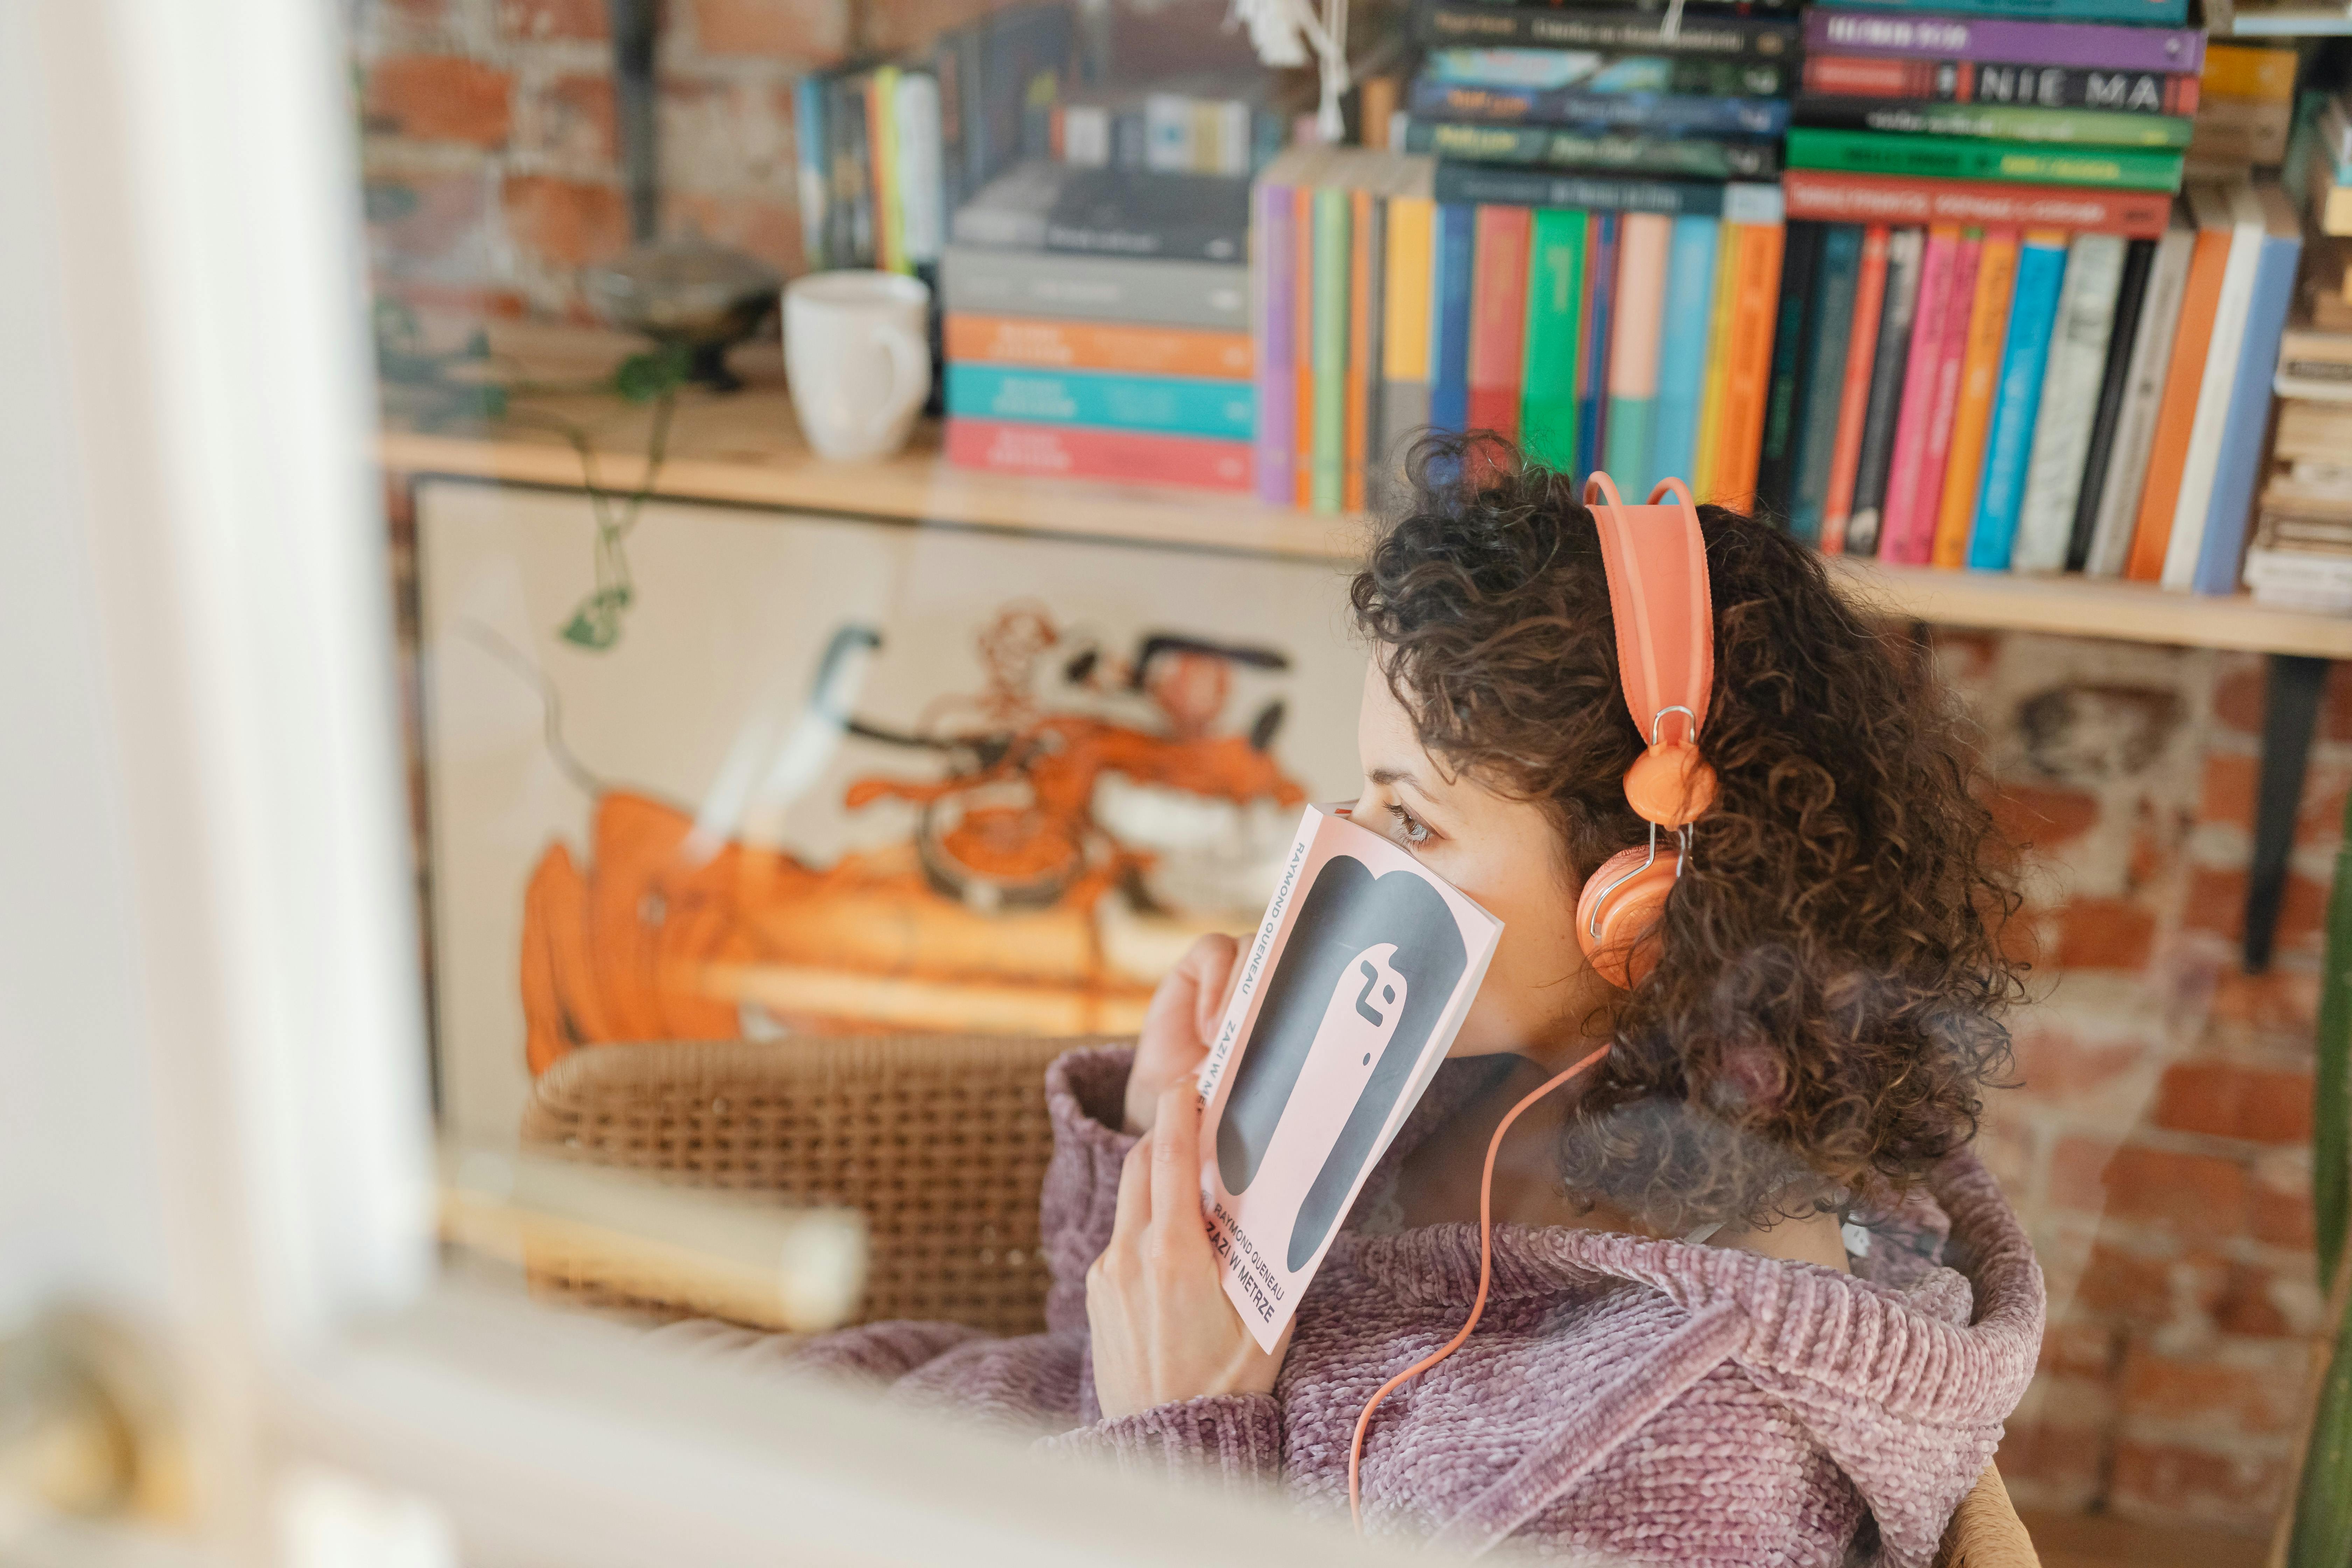 photo of a woman wearing headphones and holding a book